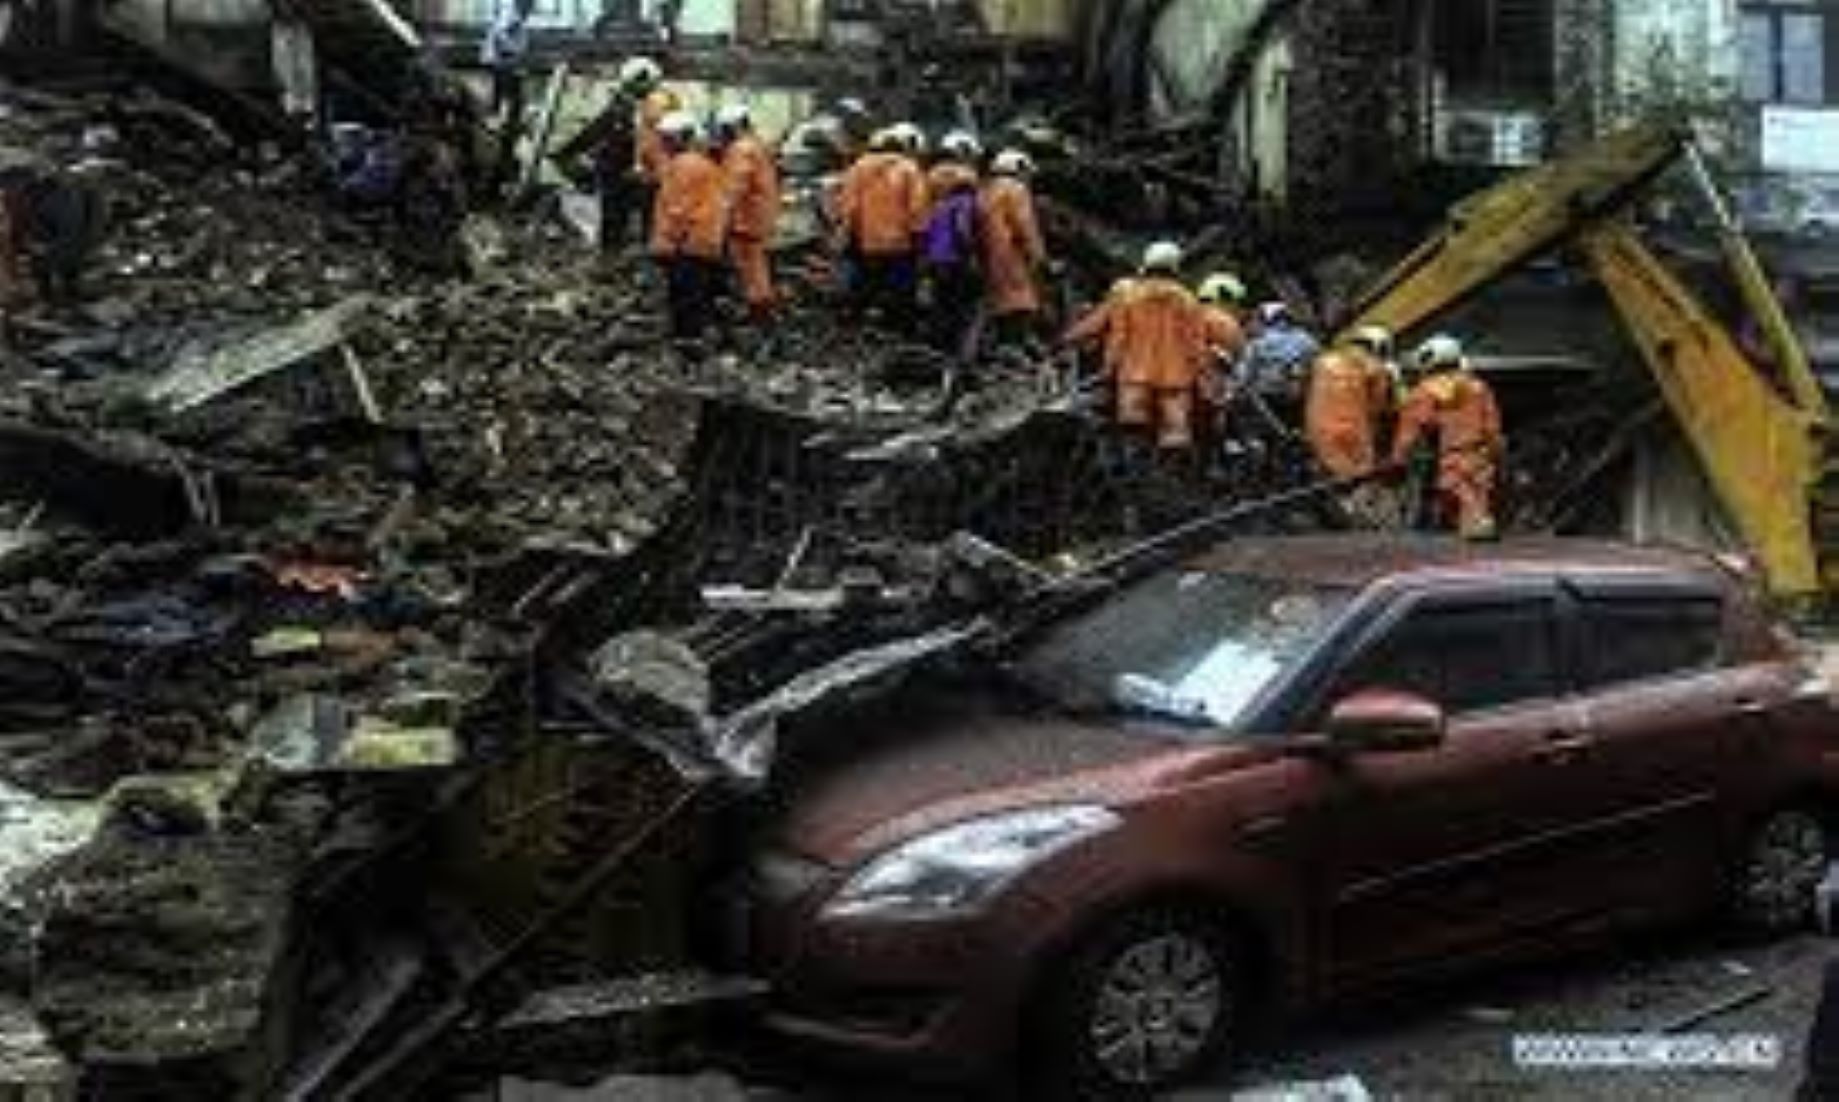 Three Persons Died In Building Collapse In N. India